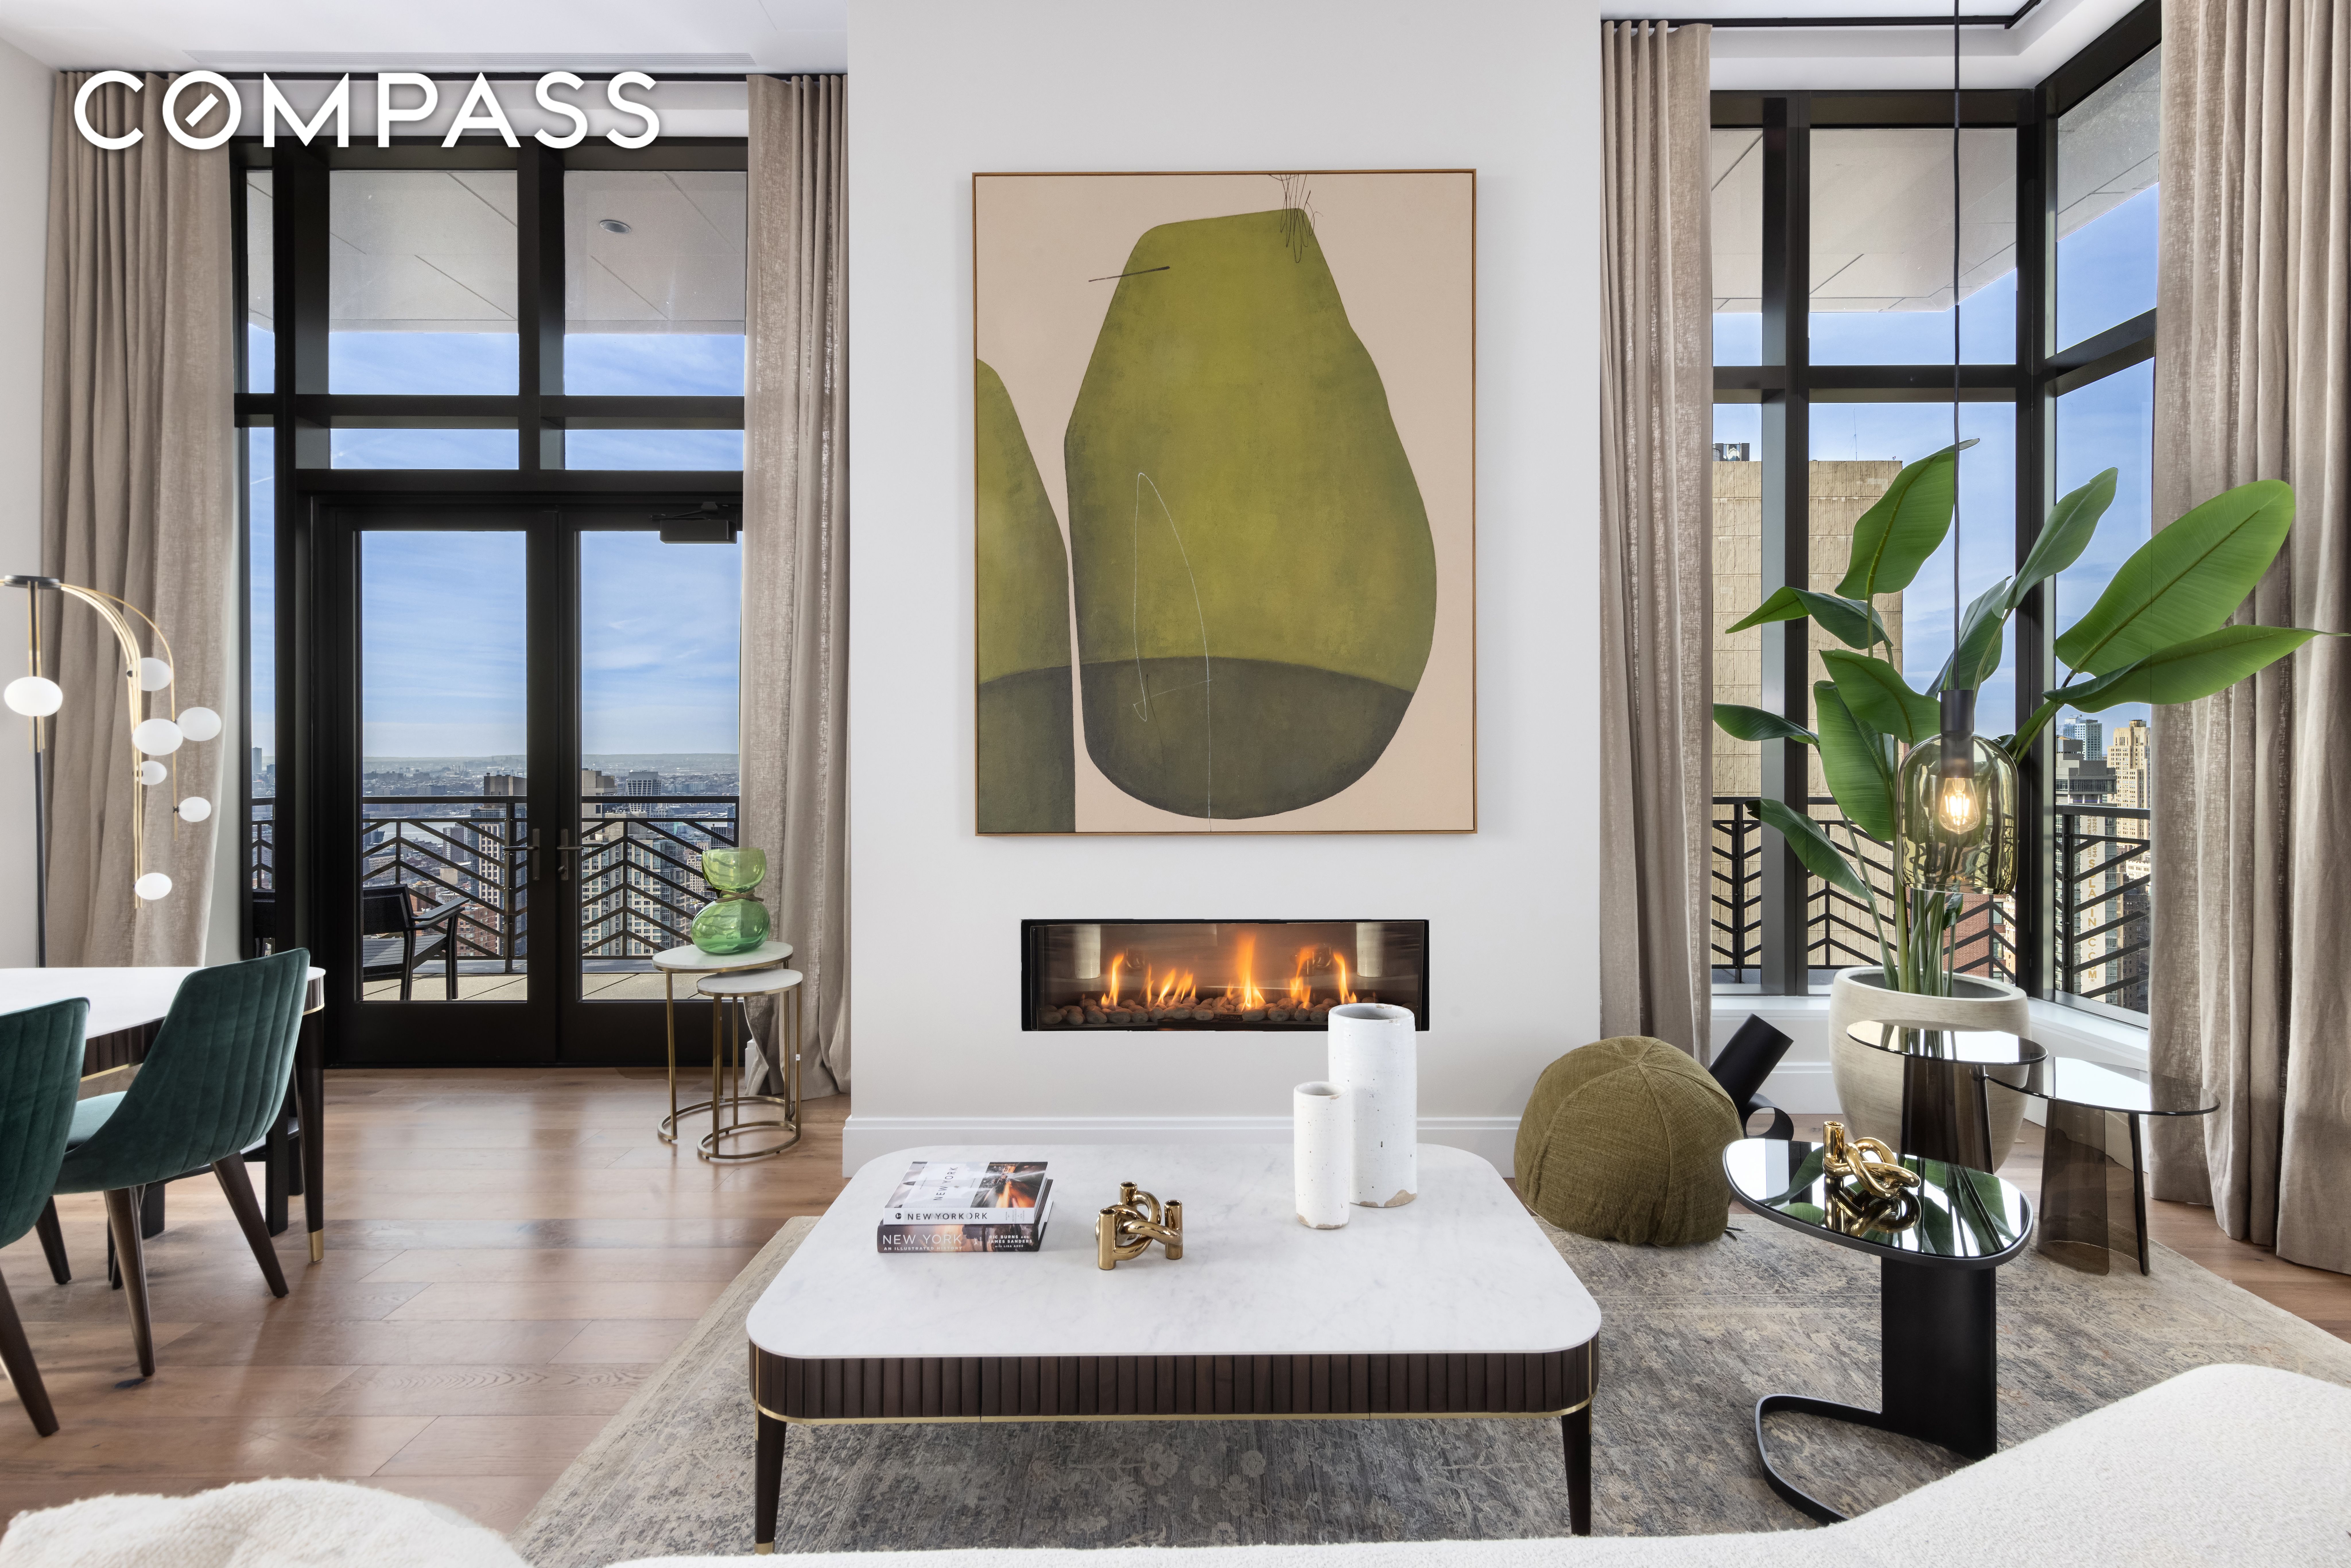 30 East 29th Street Phb, Nomad, Downtown, NYC - 4 Bedrooms  
3 Bathrooms  
7 Rooms - 